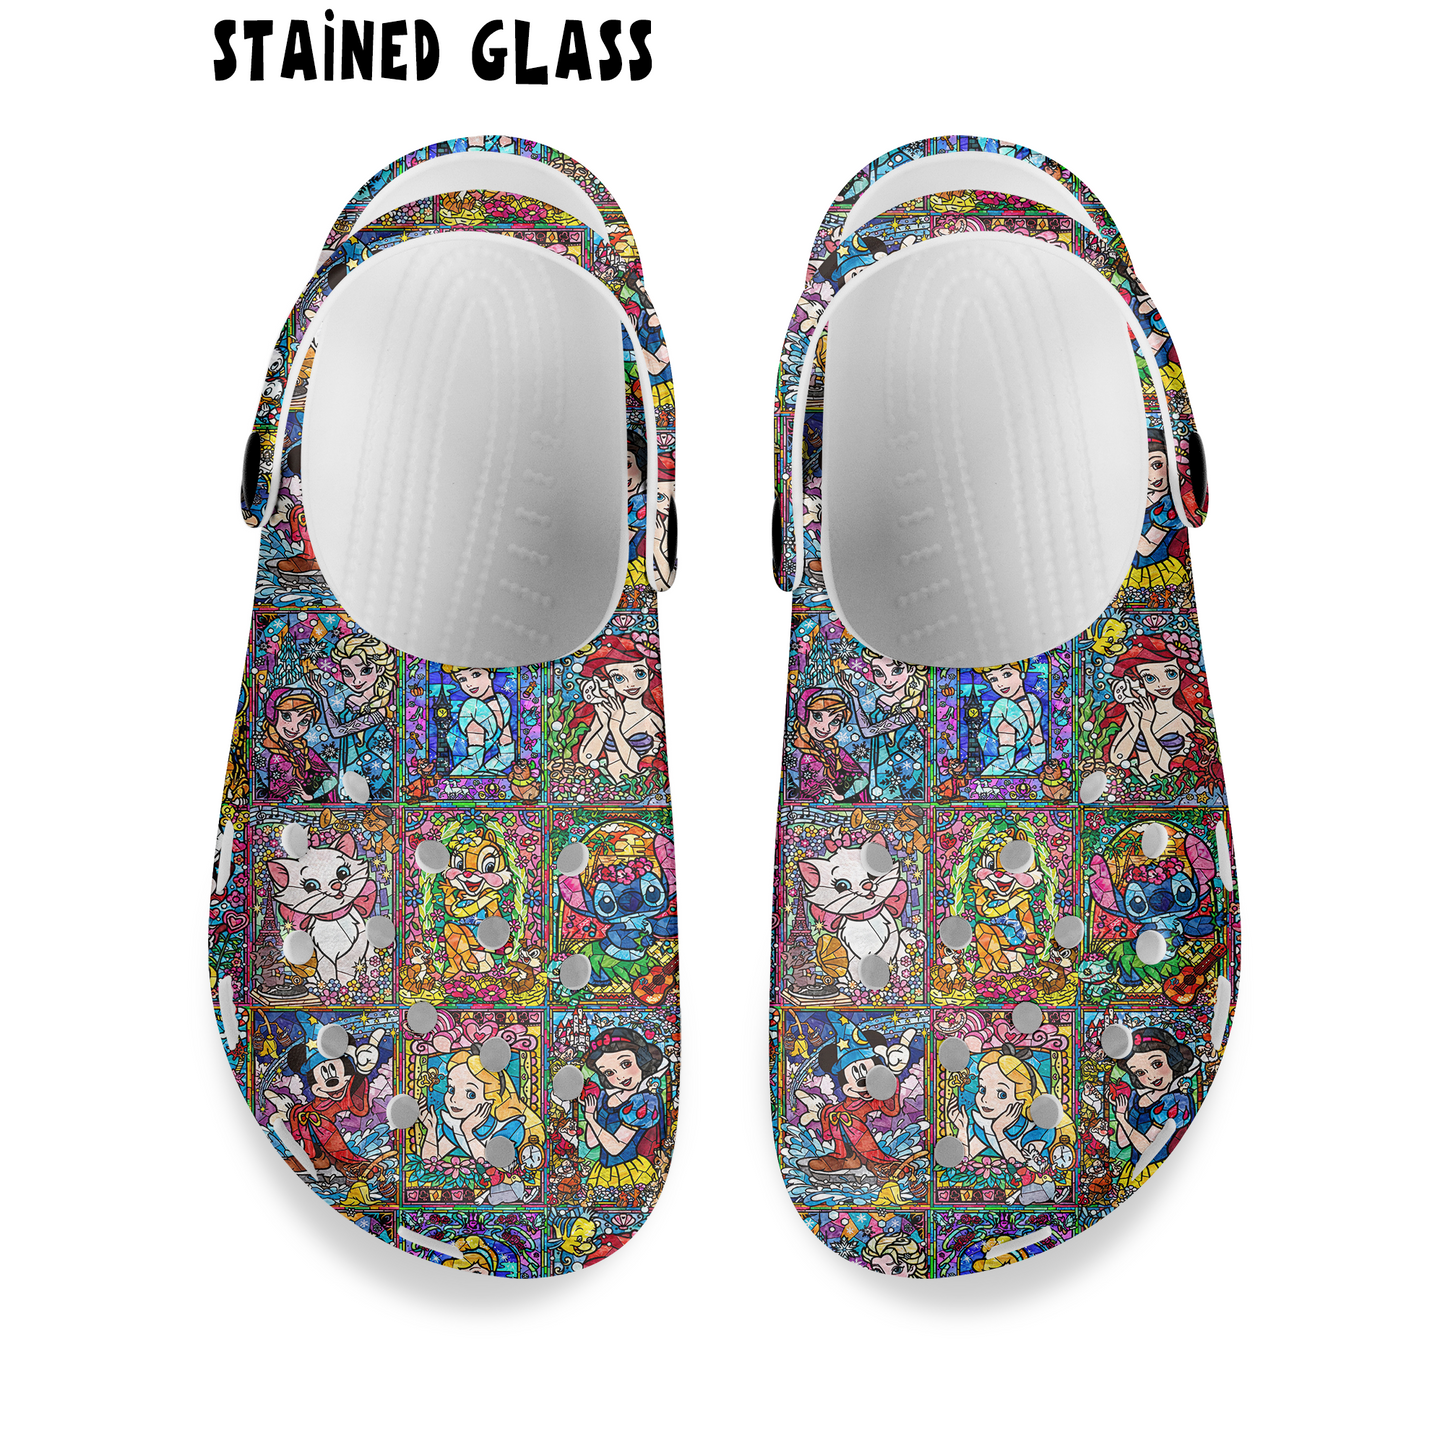 CLOG 1 RUN-STAINED GLASS